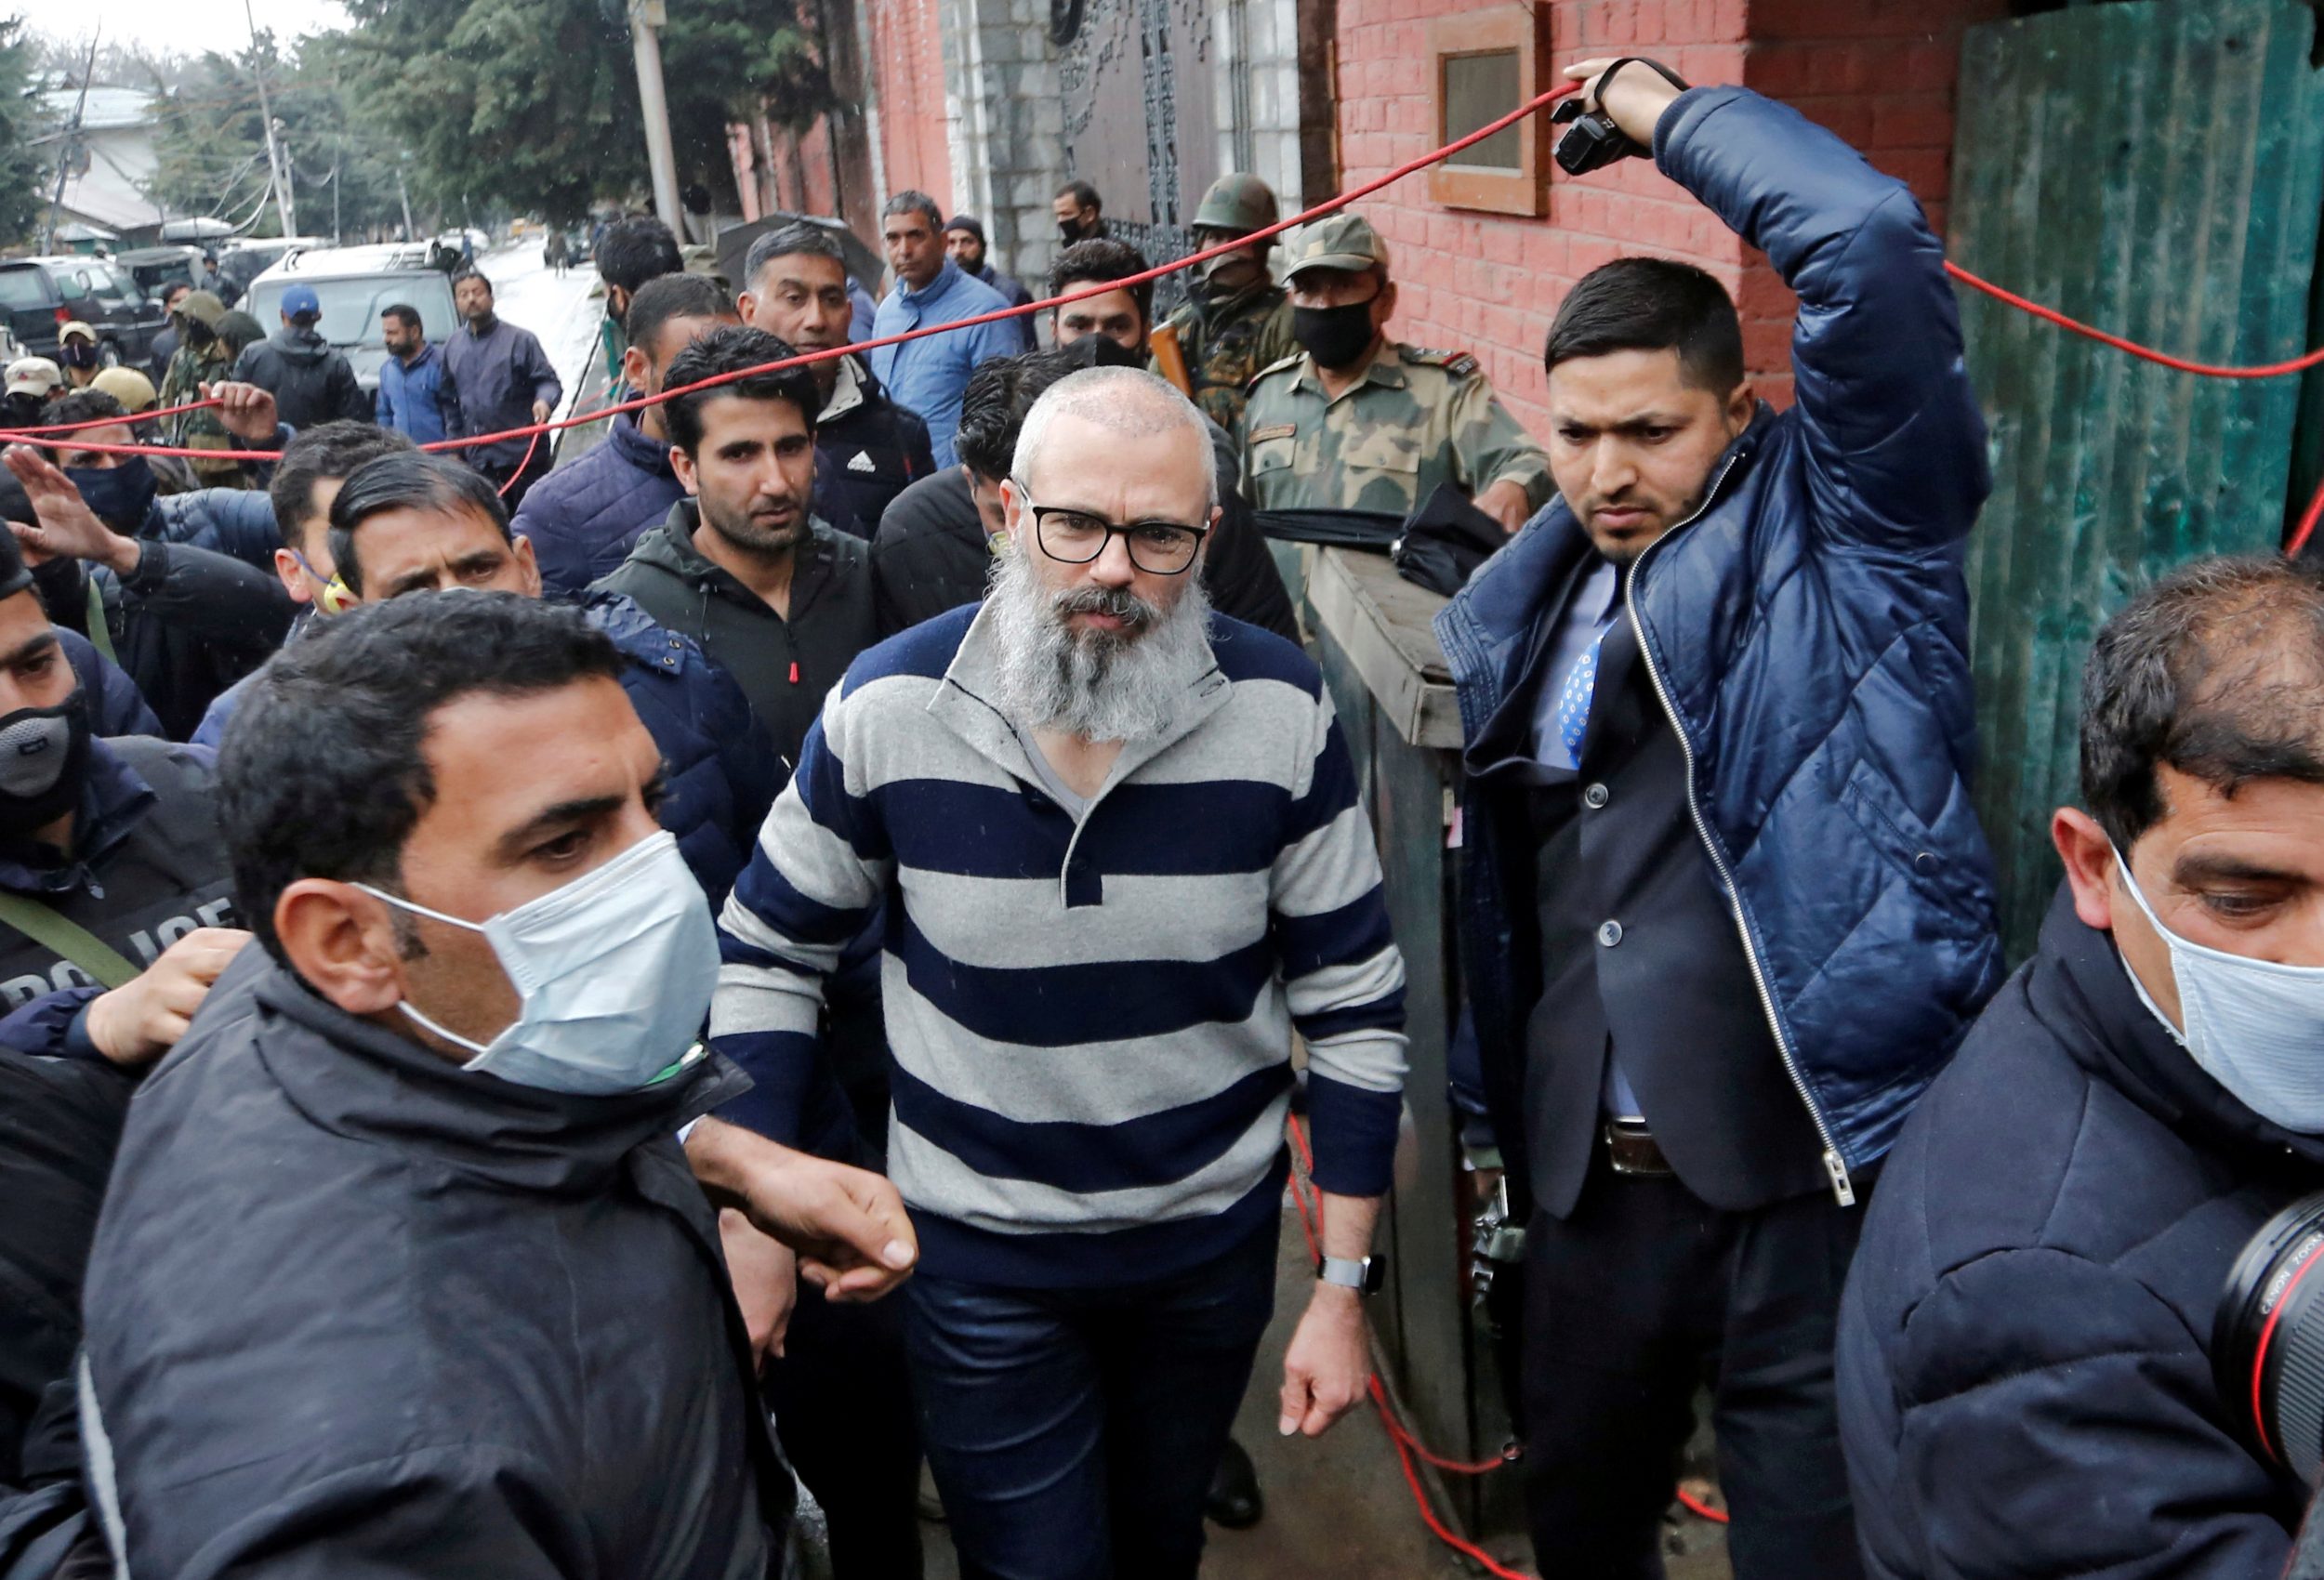 Omar Abdullah, former chief minister of Jammu and Kashmir, walks outside his residence following his release in Srinagar on 24 March 2020. He had been detained by Indian forces since August (Reuters)